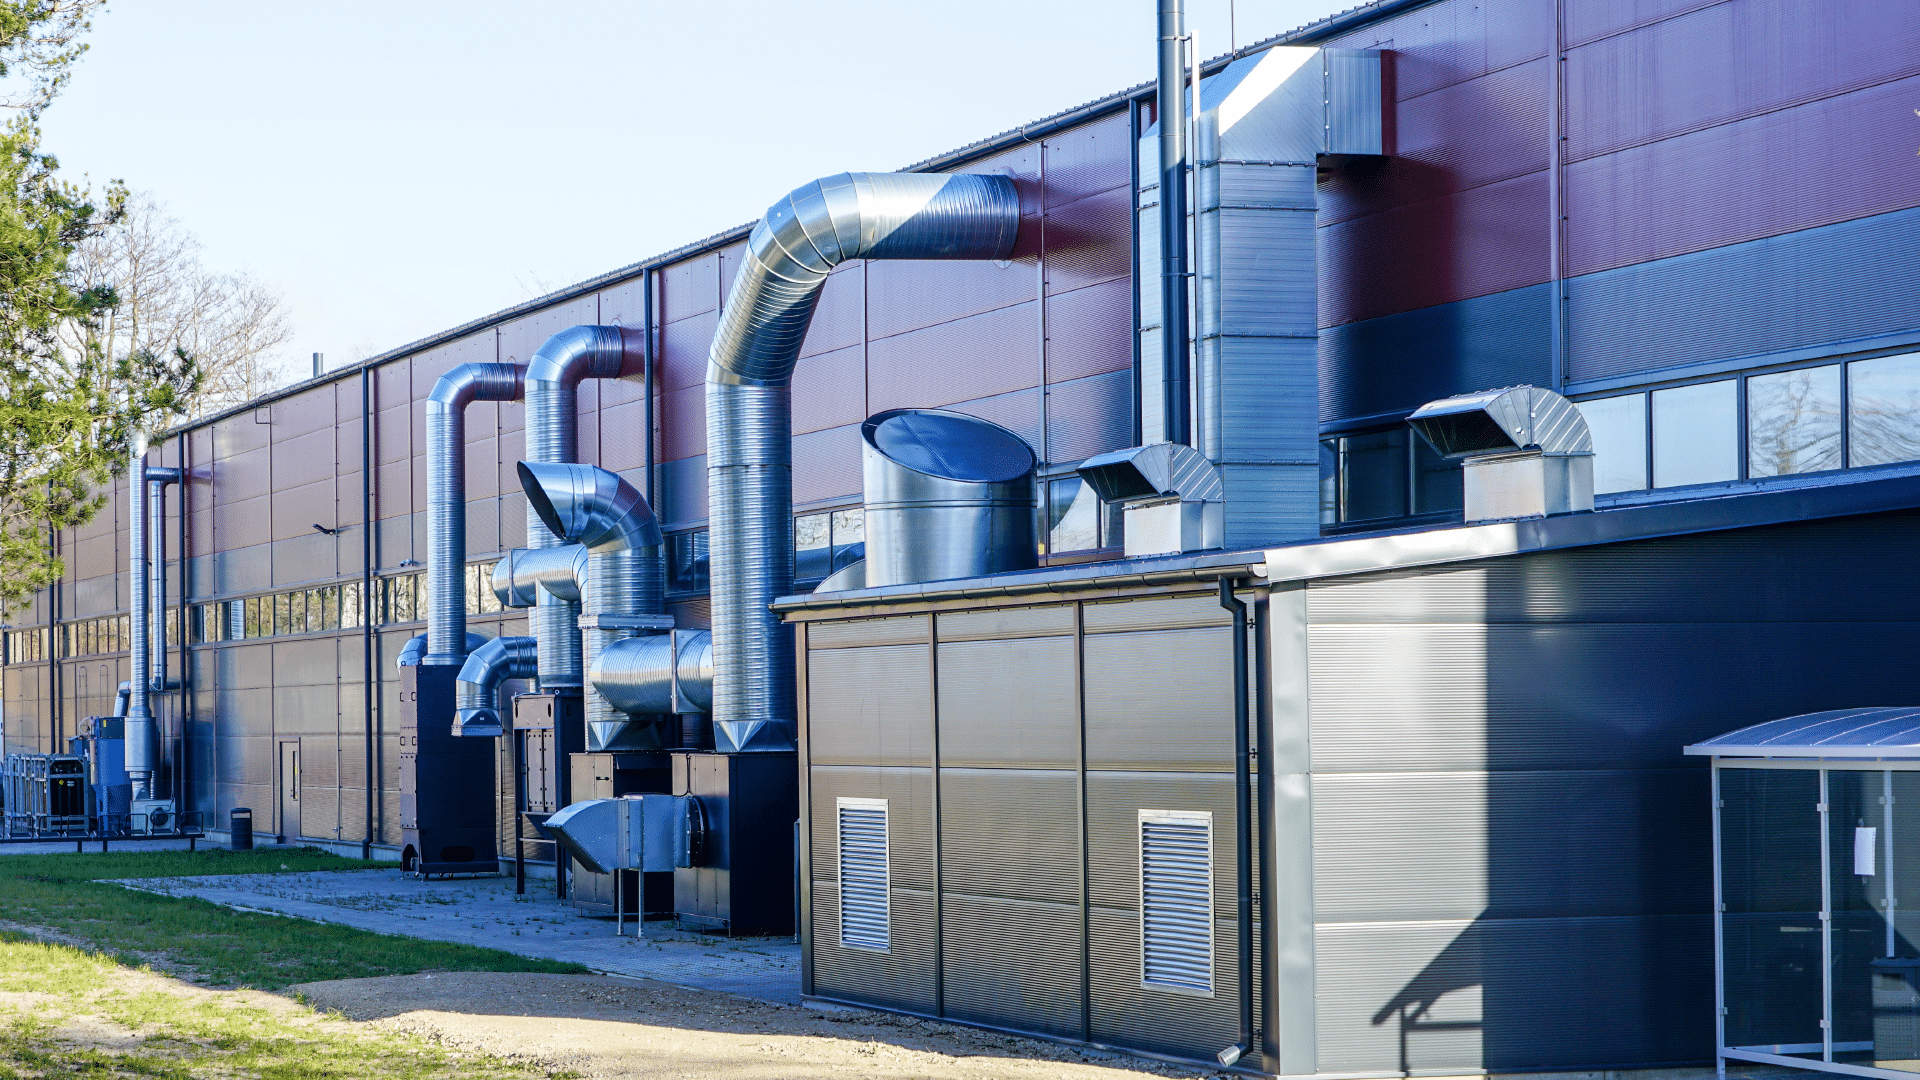 A red building showing external Ductwork, AHU, and Acoustic Solutions